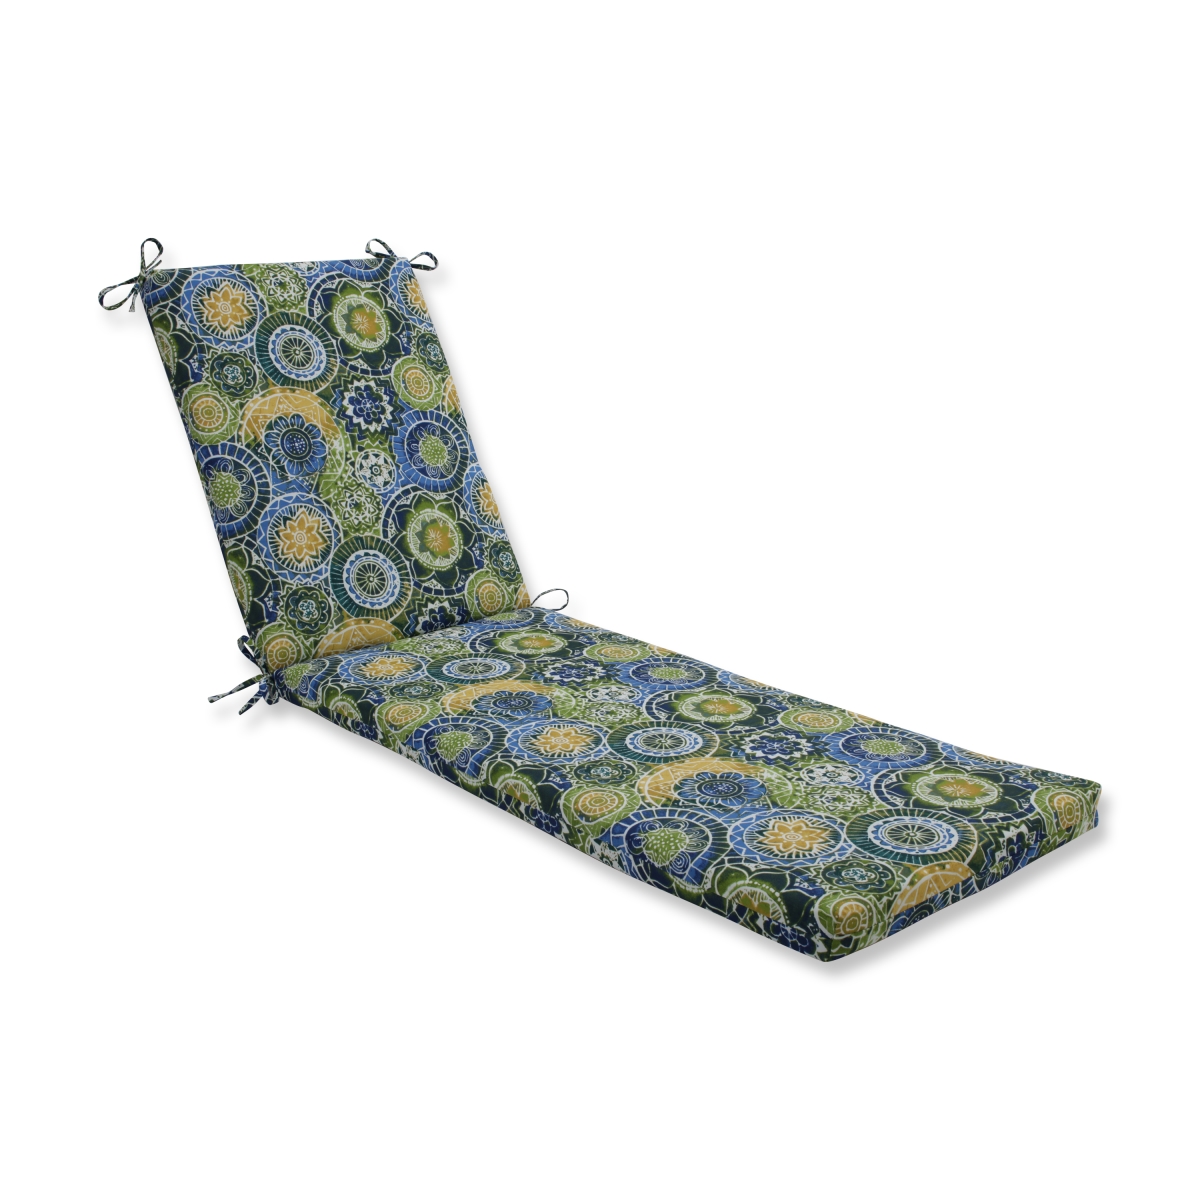 80 X 23 X 3 In. Outdoor & Indoor Omnia Lagoon Chaise Lounge Cushion, Blue